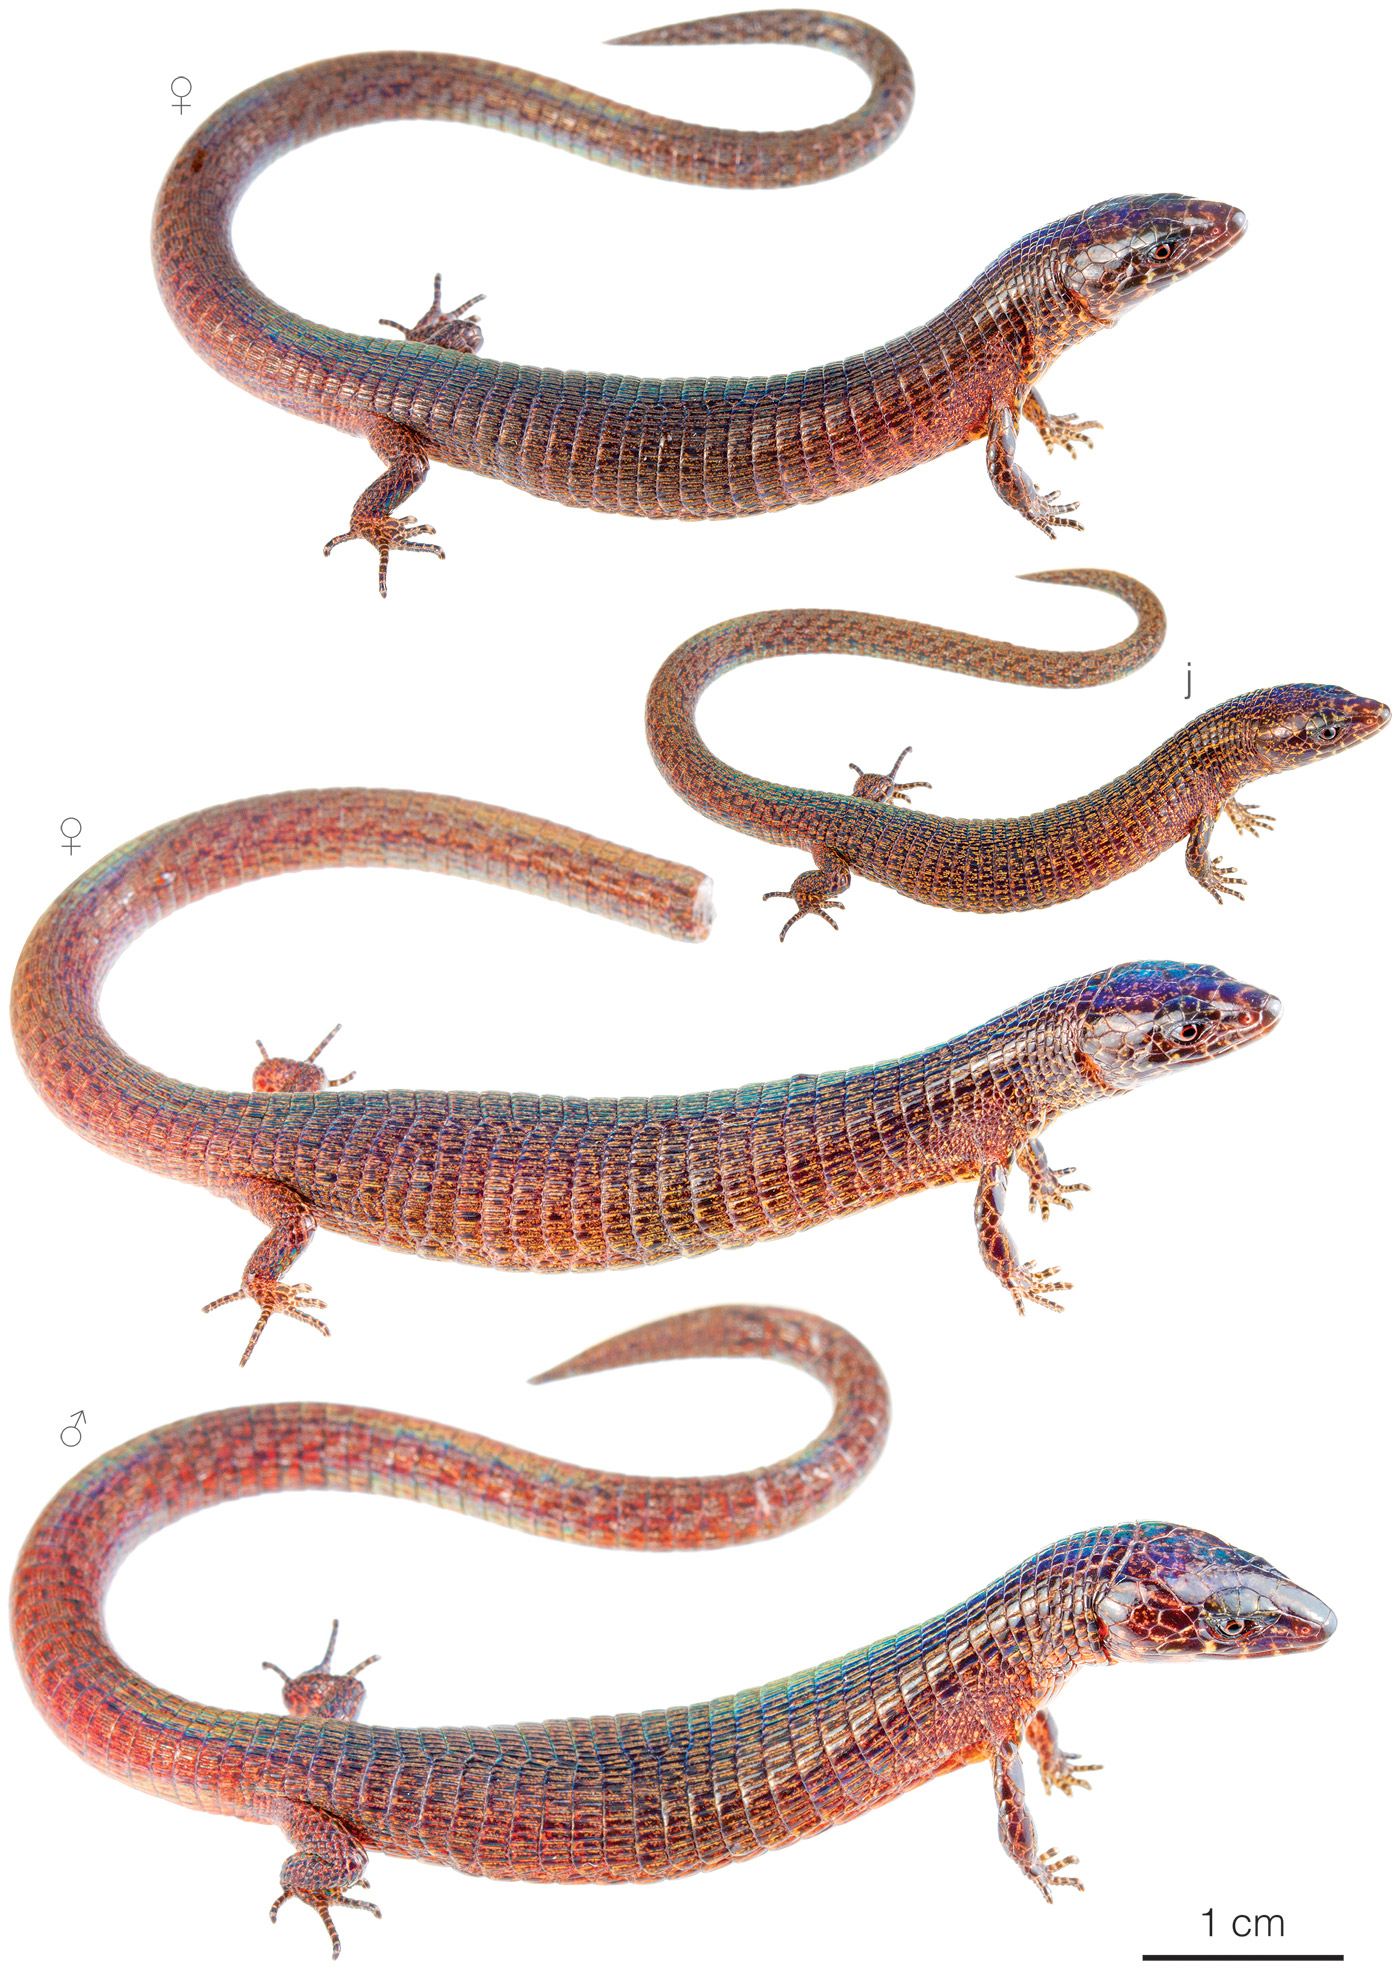 Figure showing variation among individuals of Riama labionis